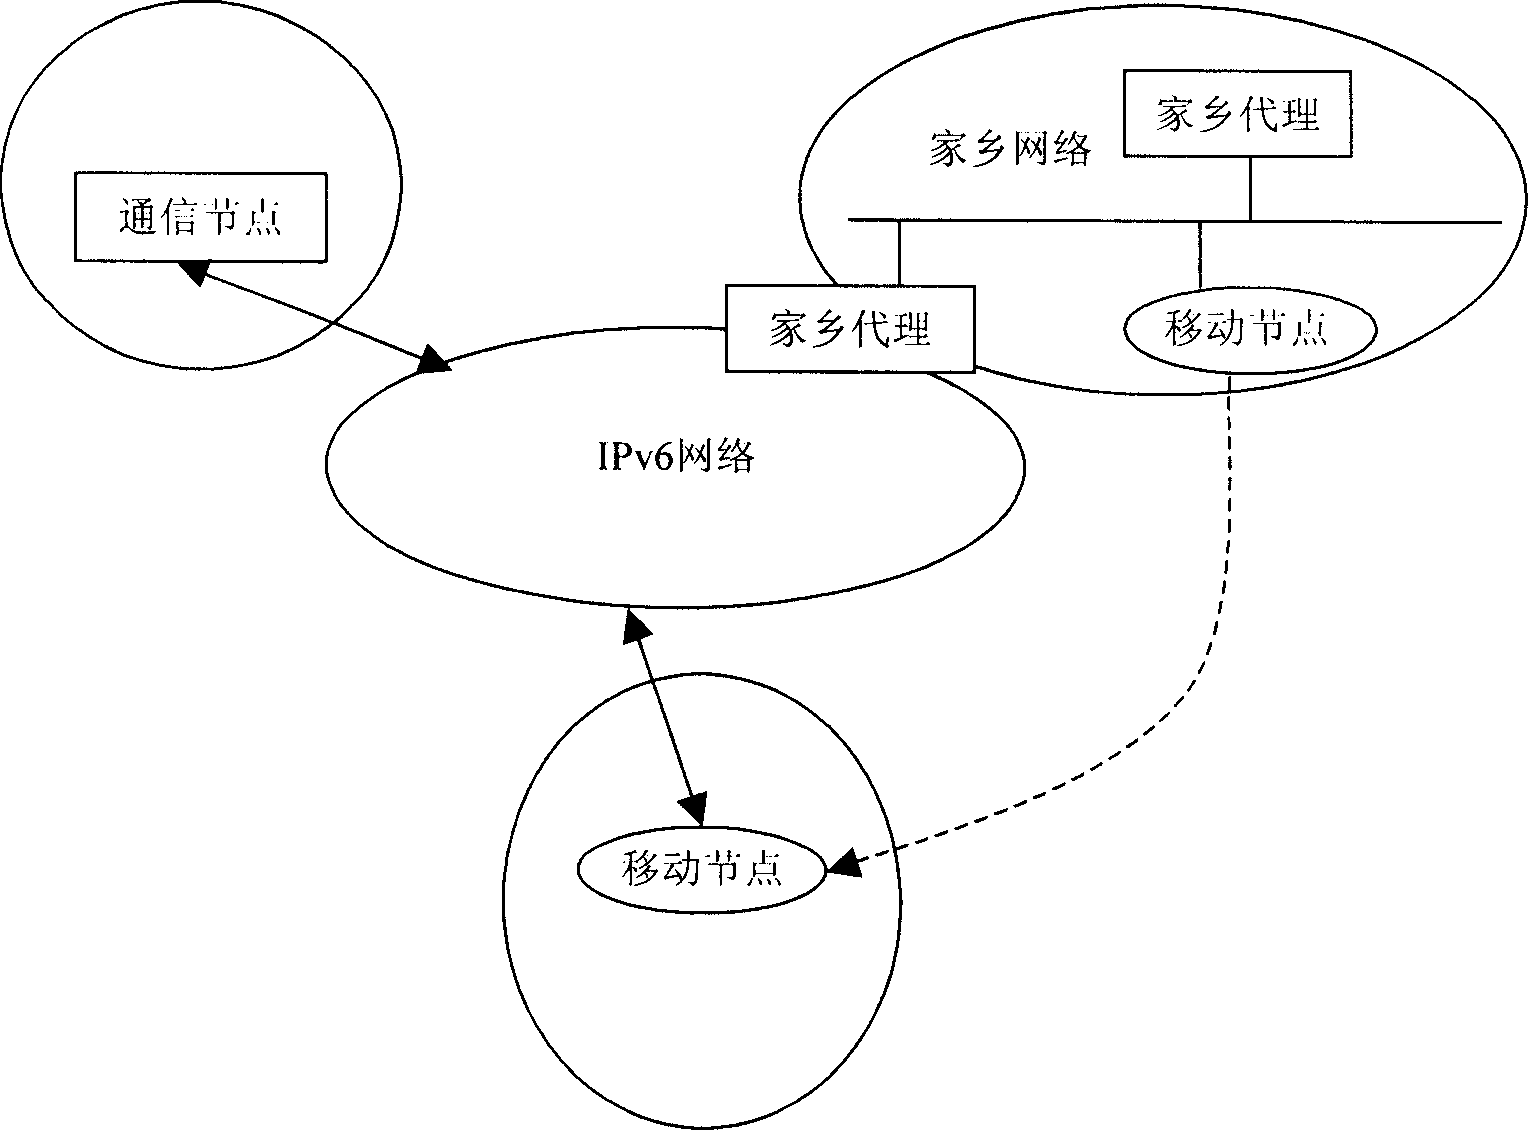 Method for increasing hometown agent message retransmission property in mobile IP network